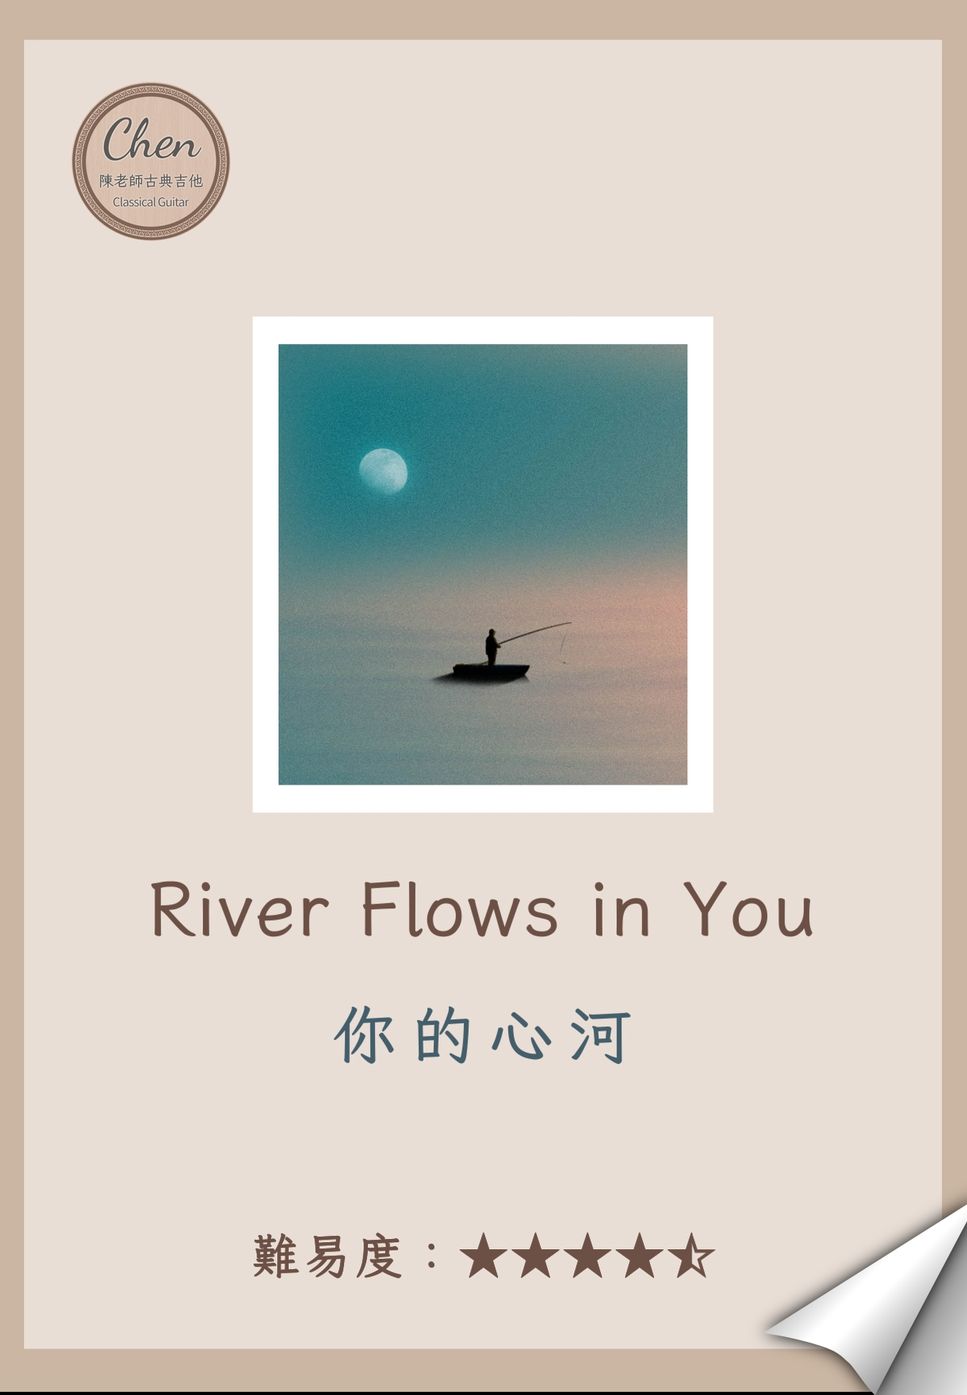 Guitar Solo - River flows in you by 陳老師古典吉他